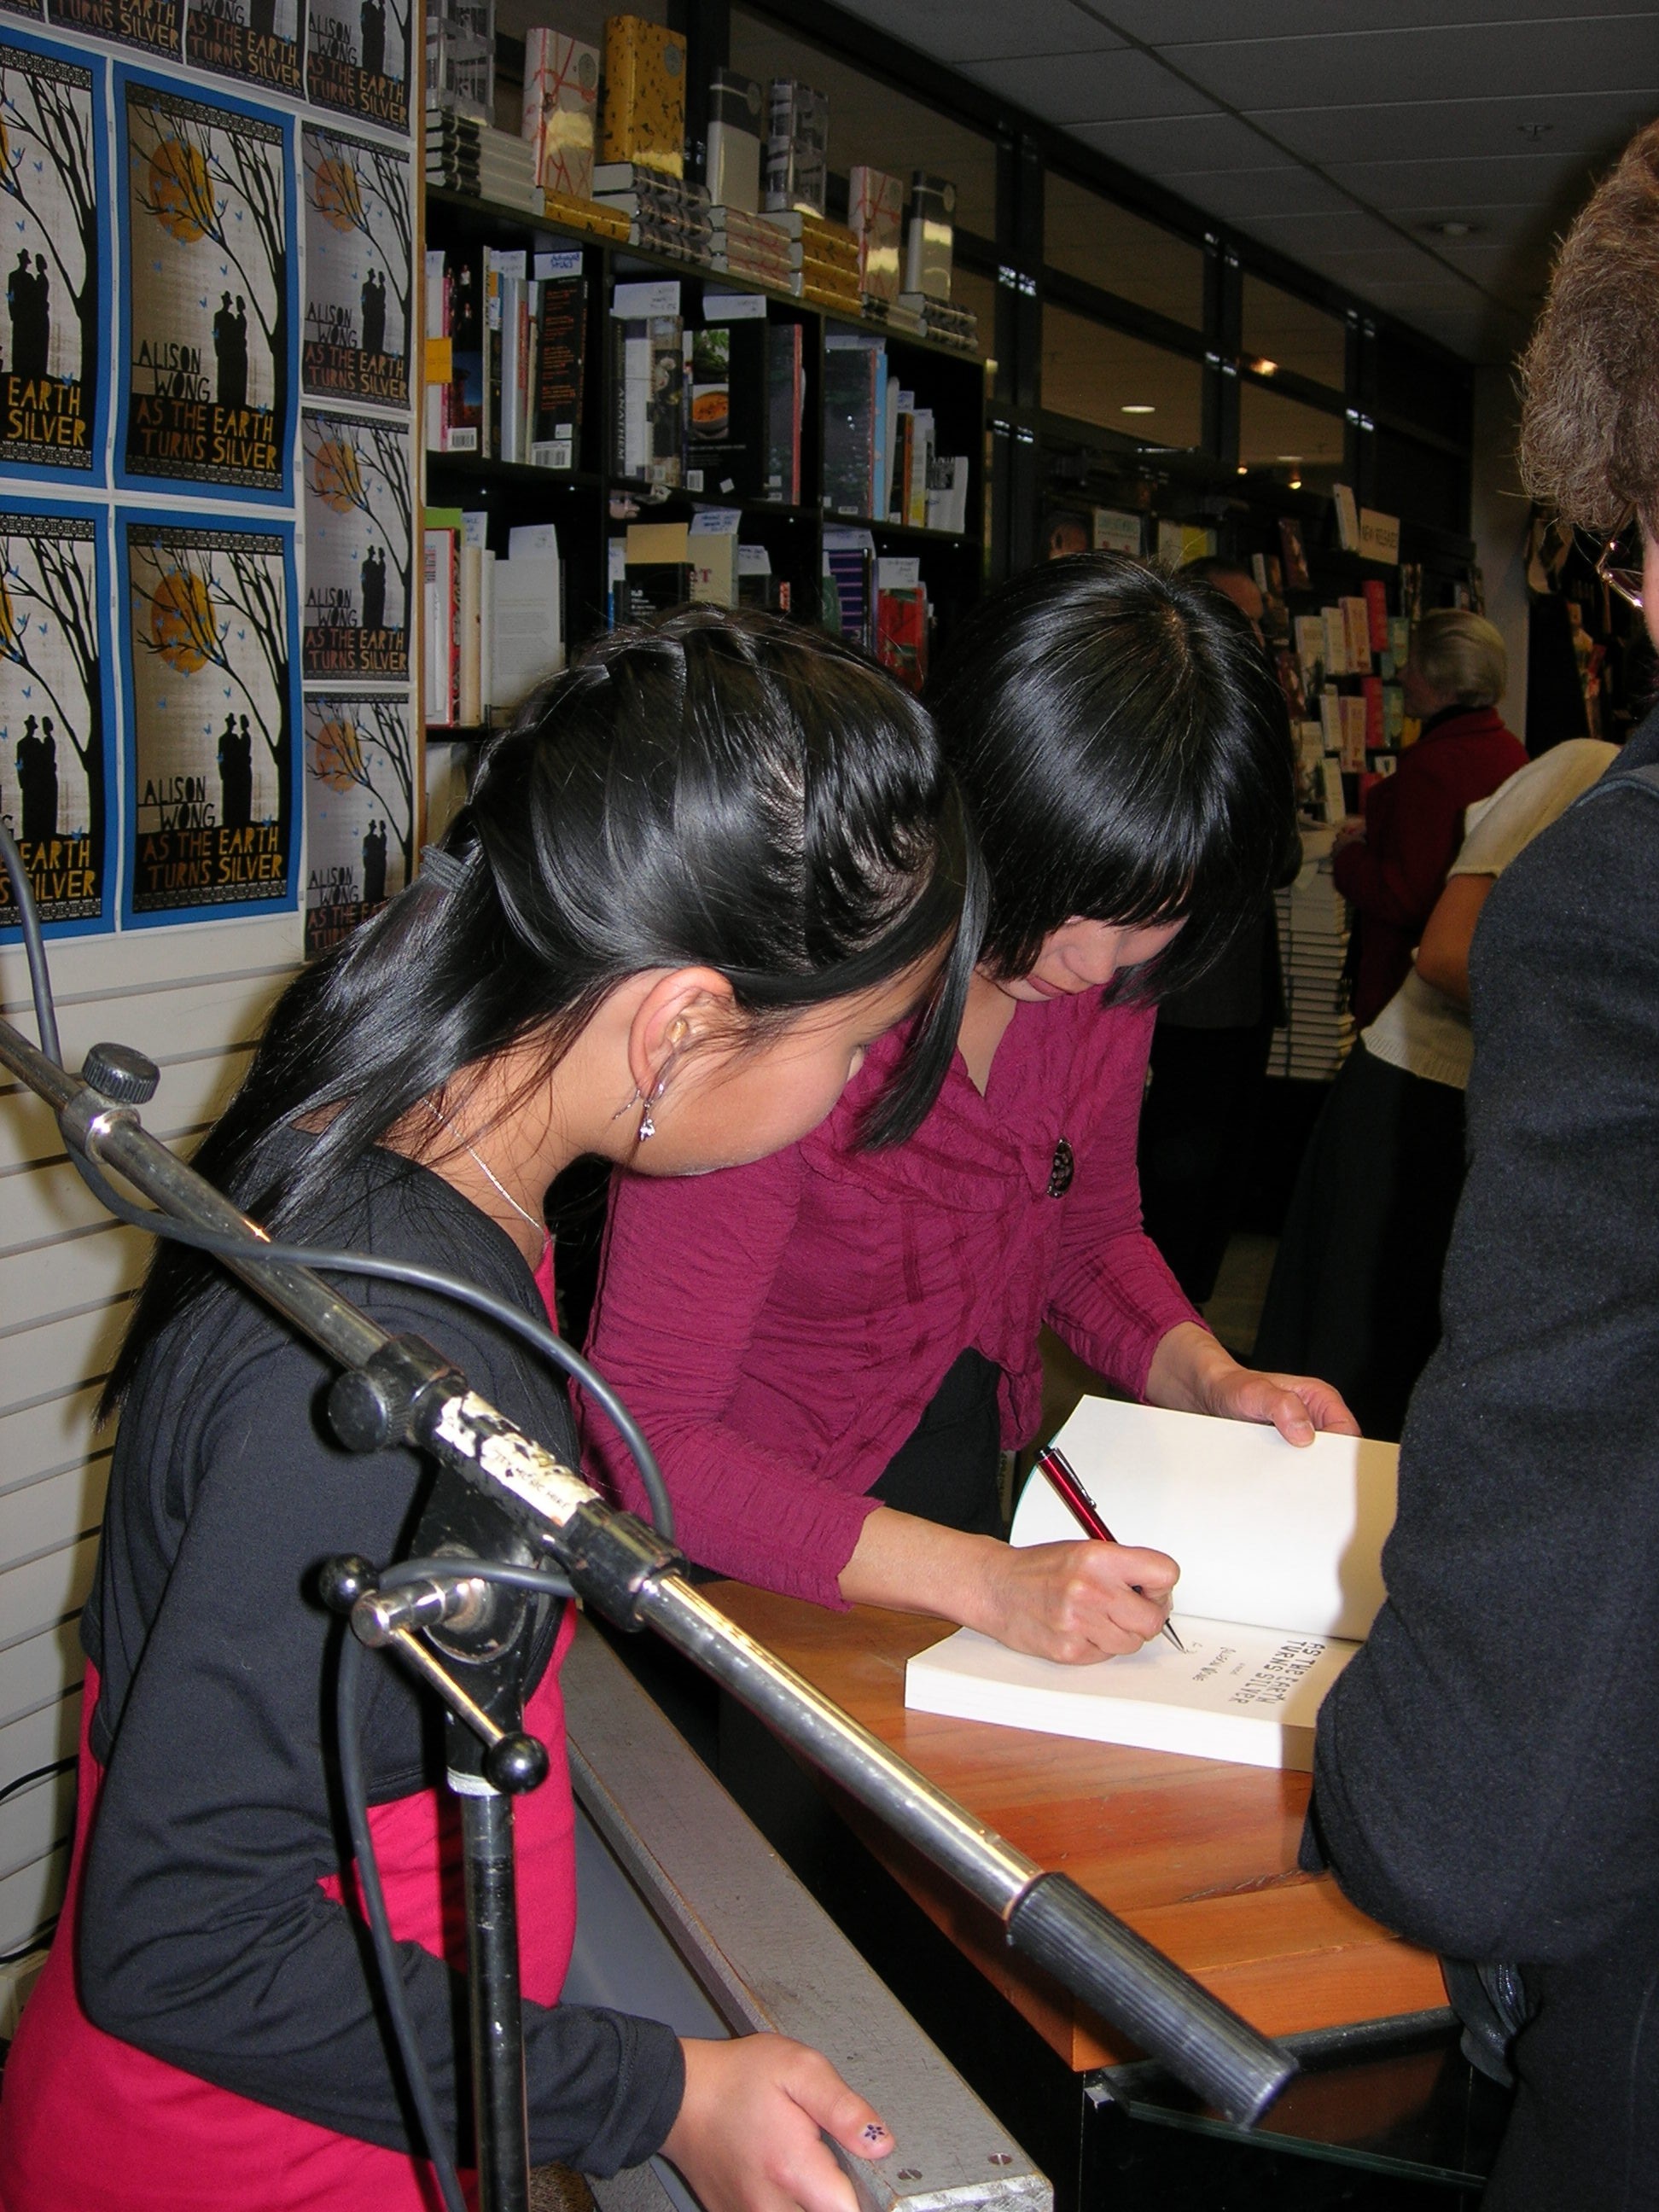 A woman wearing a burgundy knit signing books at a wooden table